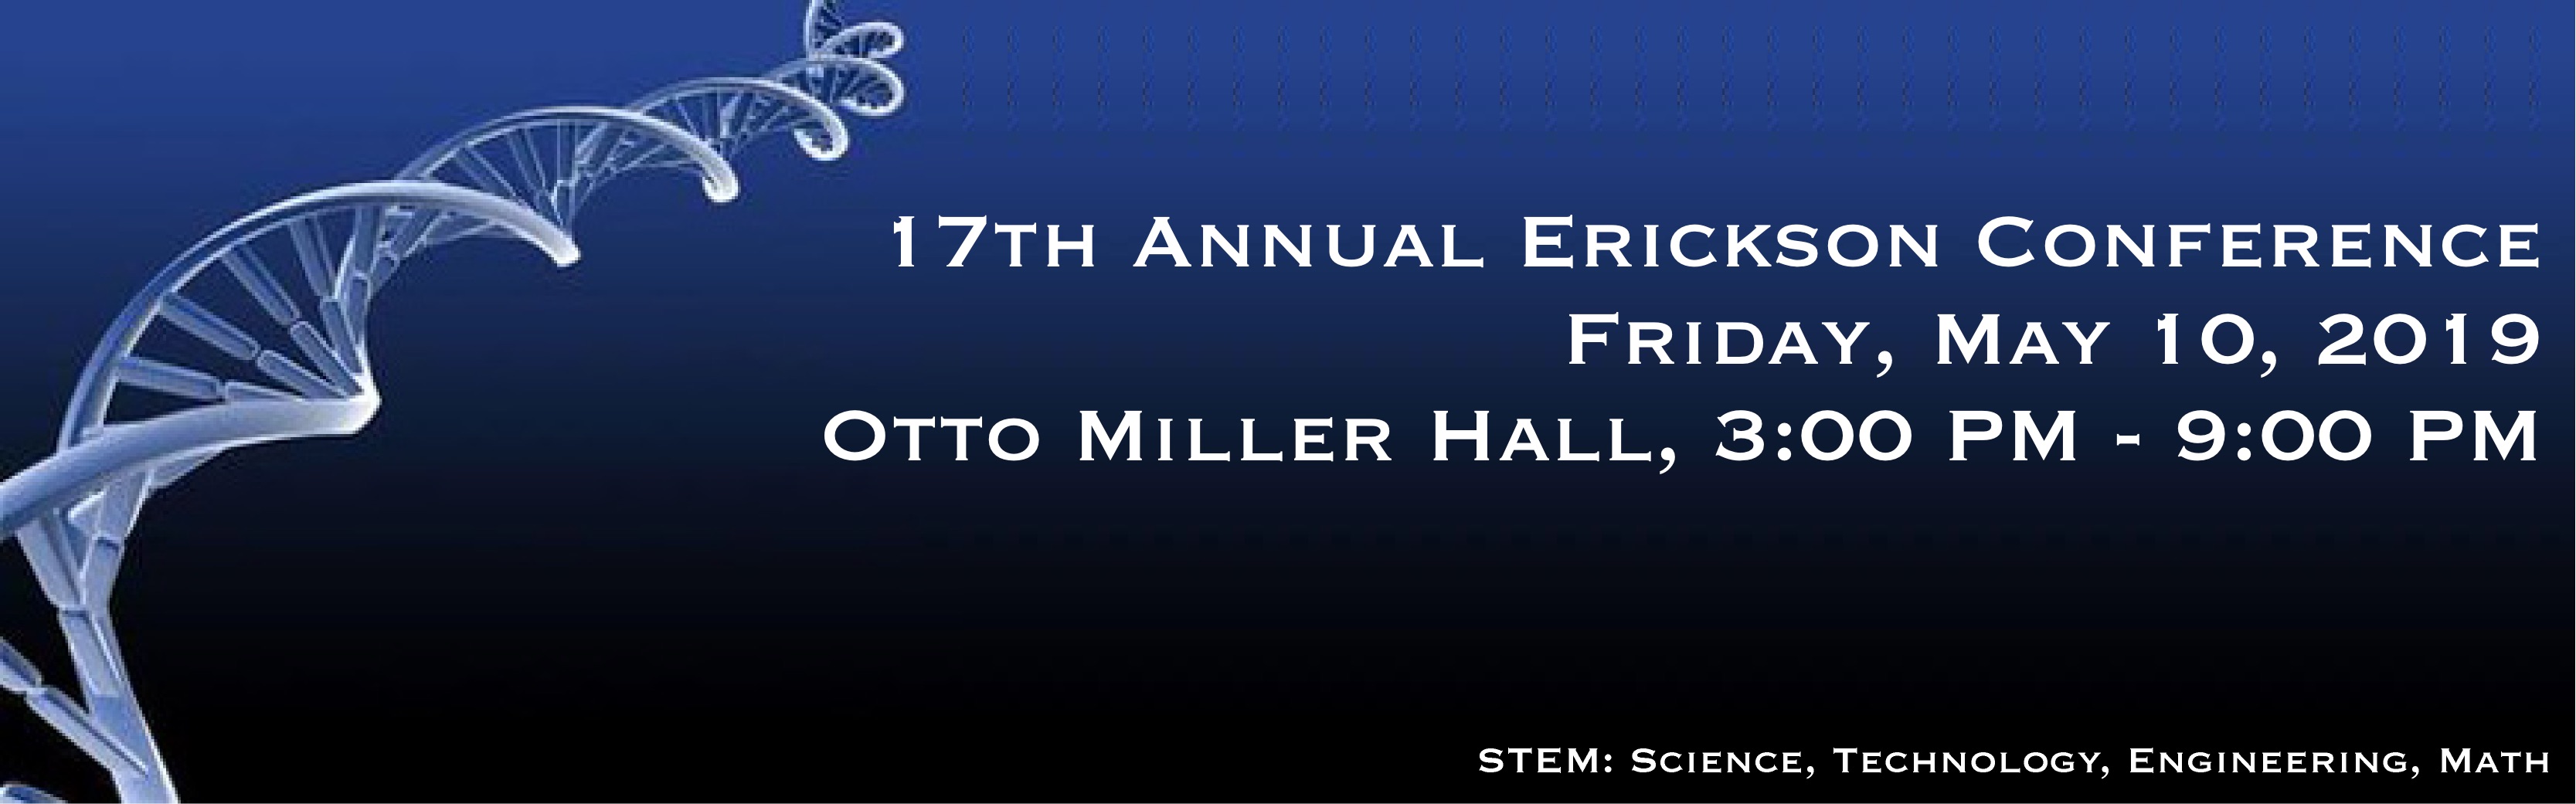 17th Annual Erickson Conference banner May 10, 2019